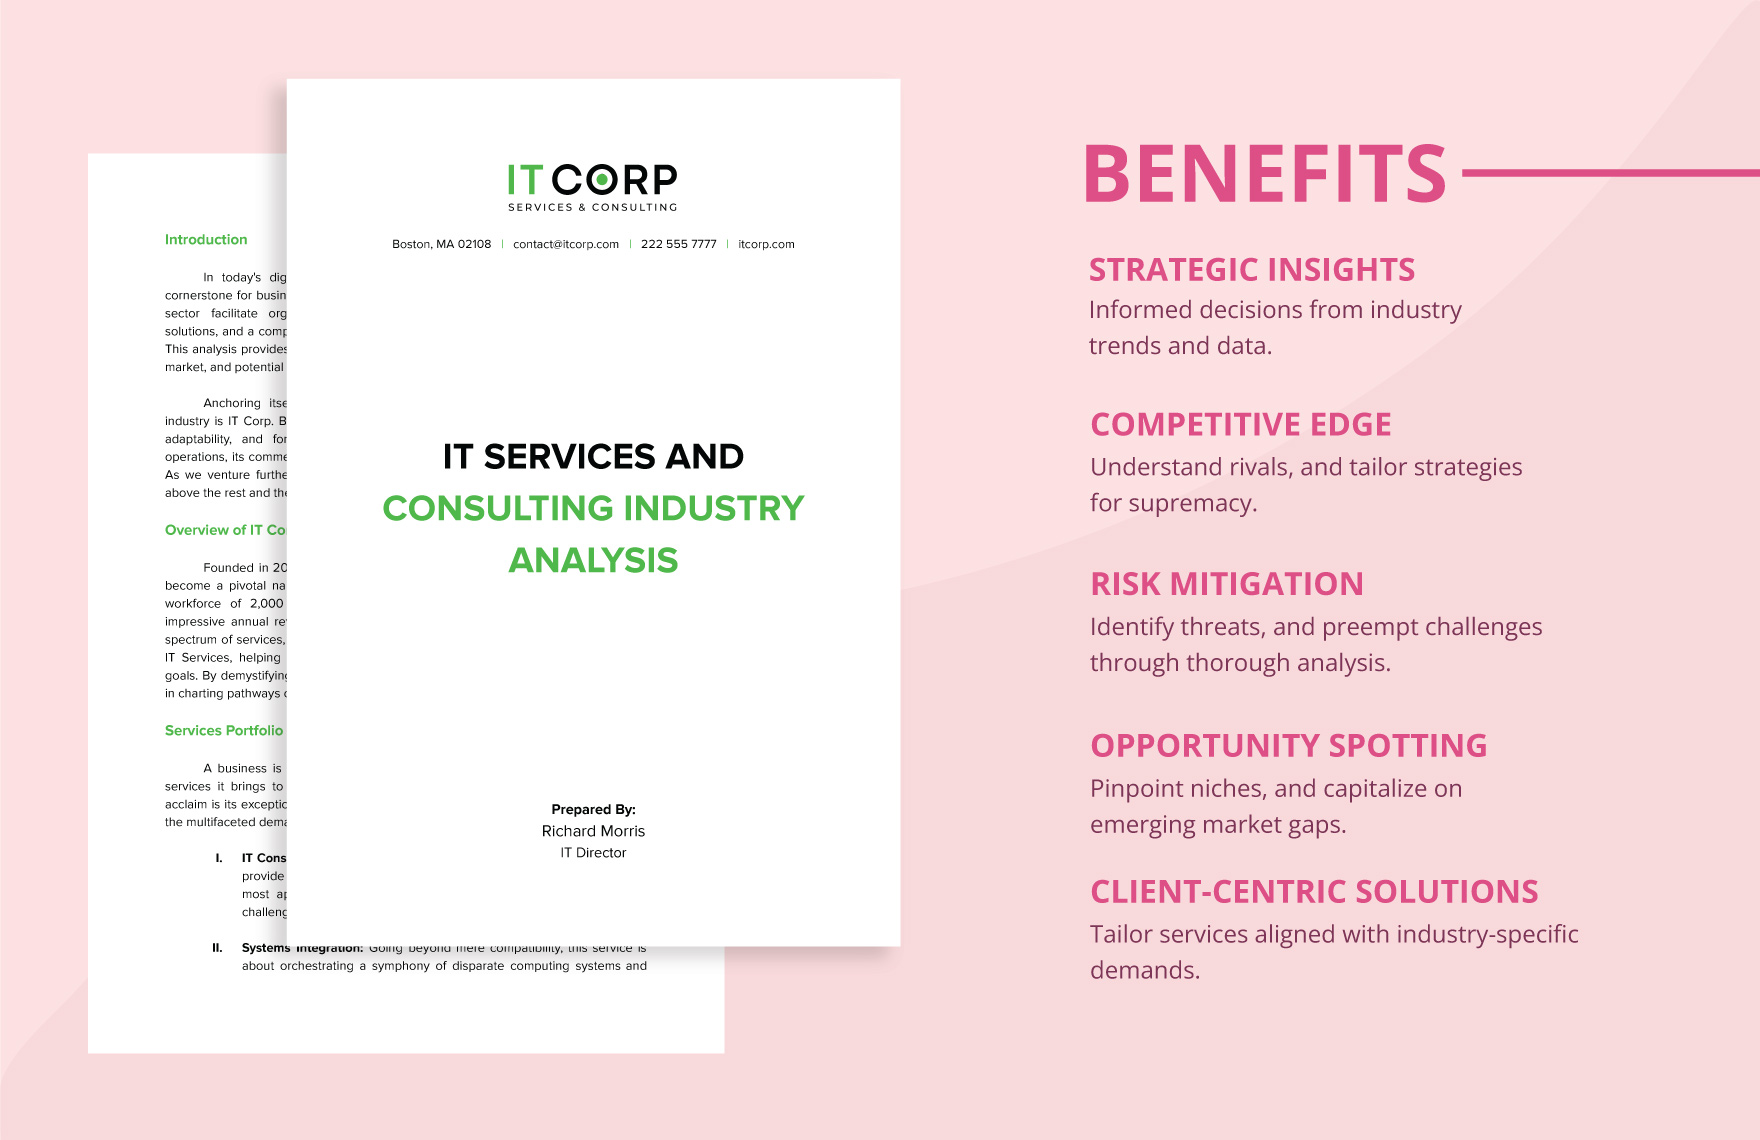 IT Services & Consulting Industry Analysis Template